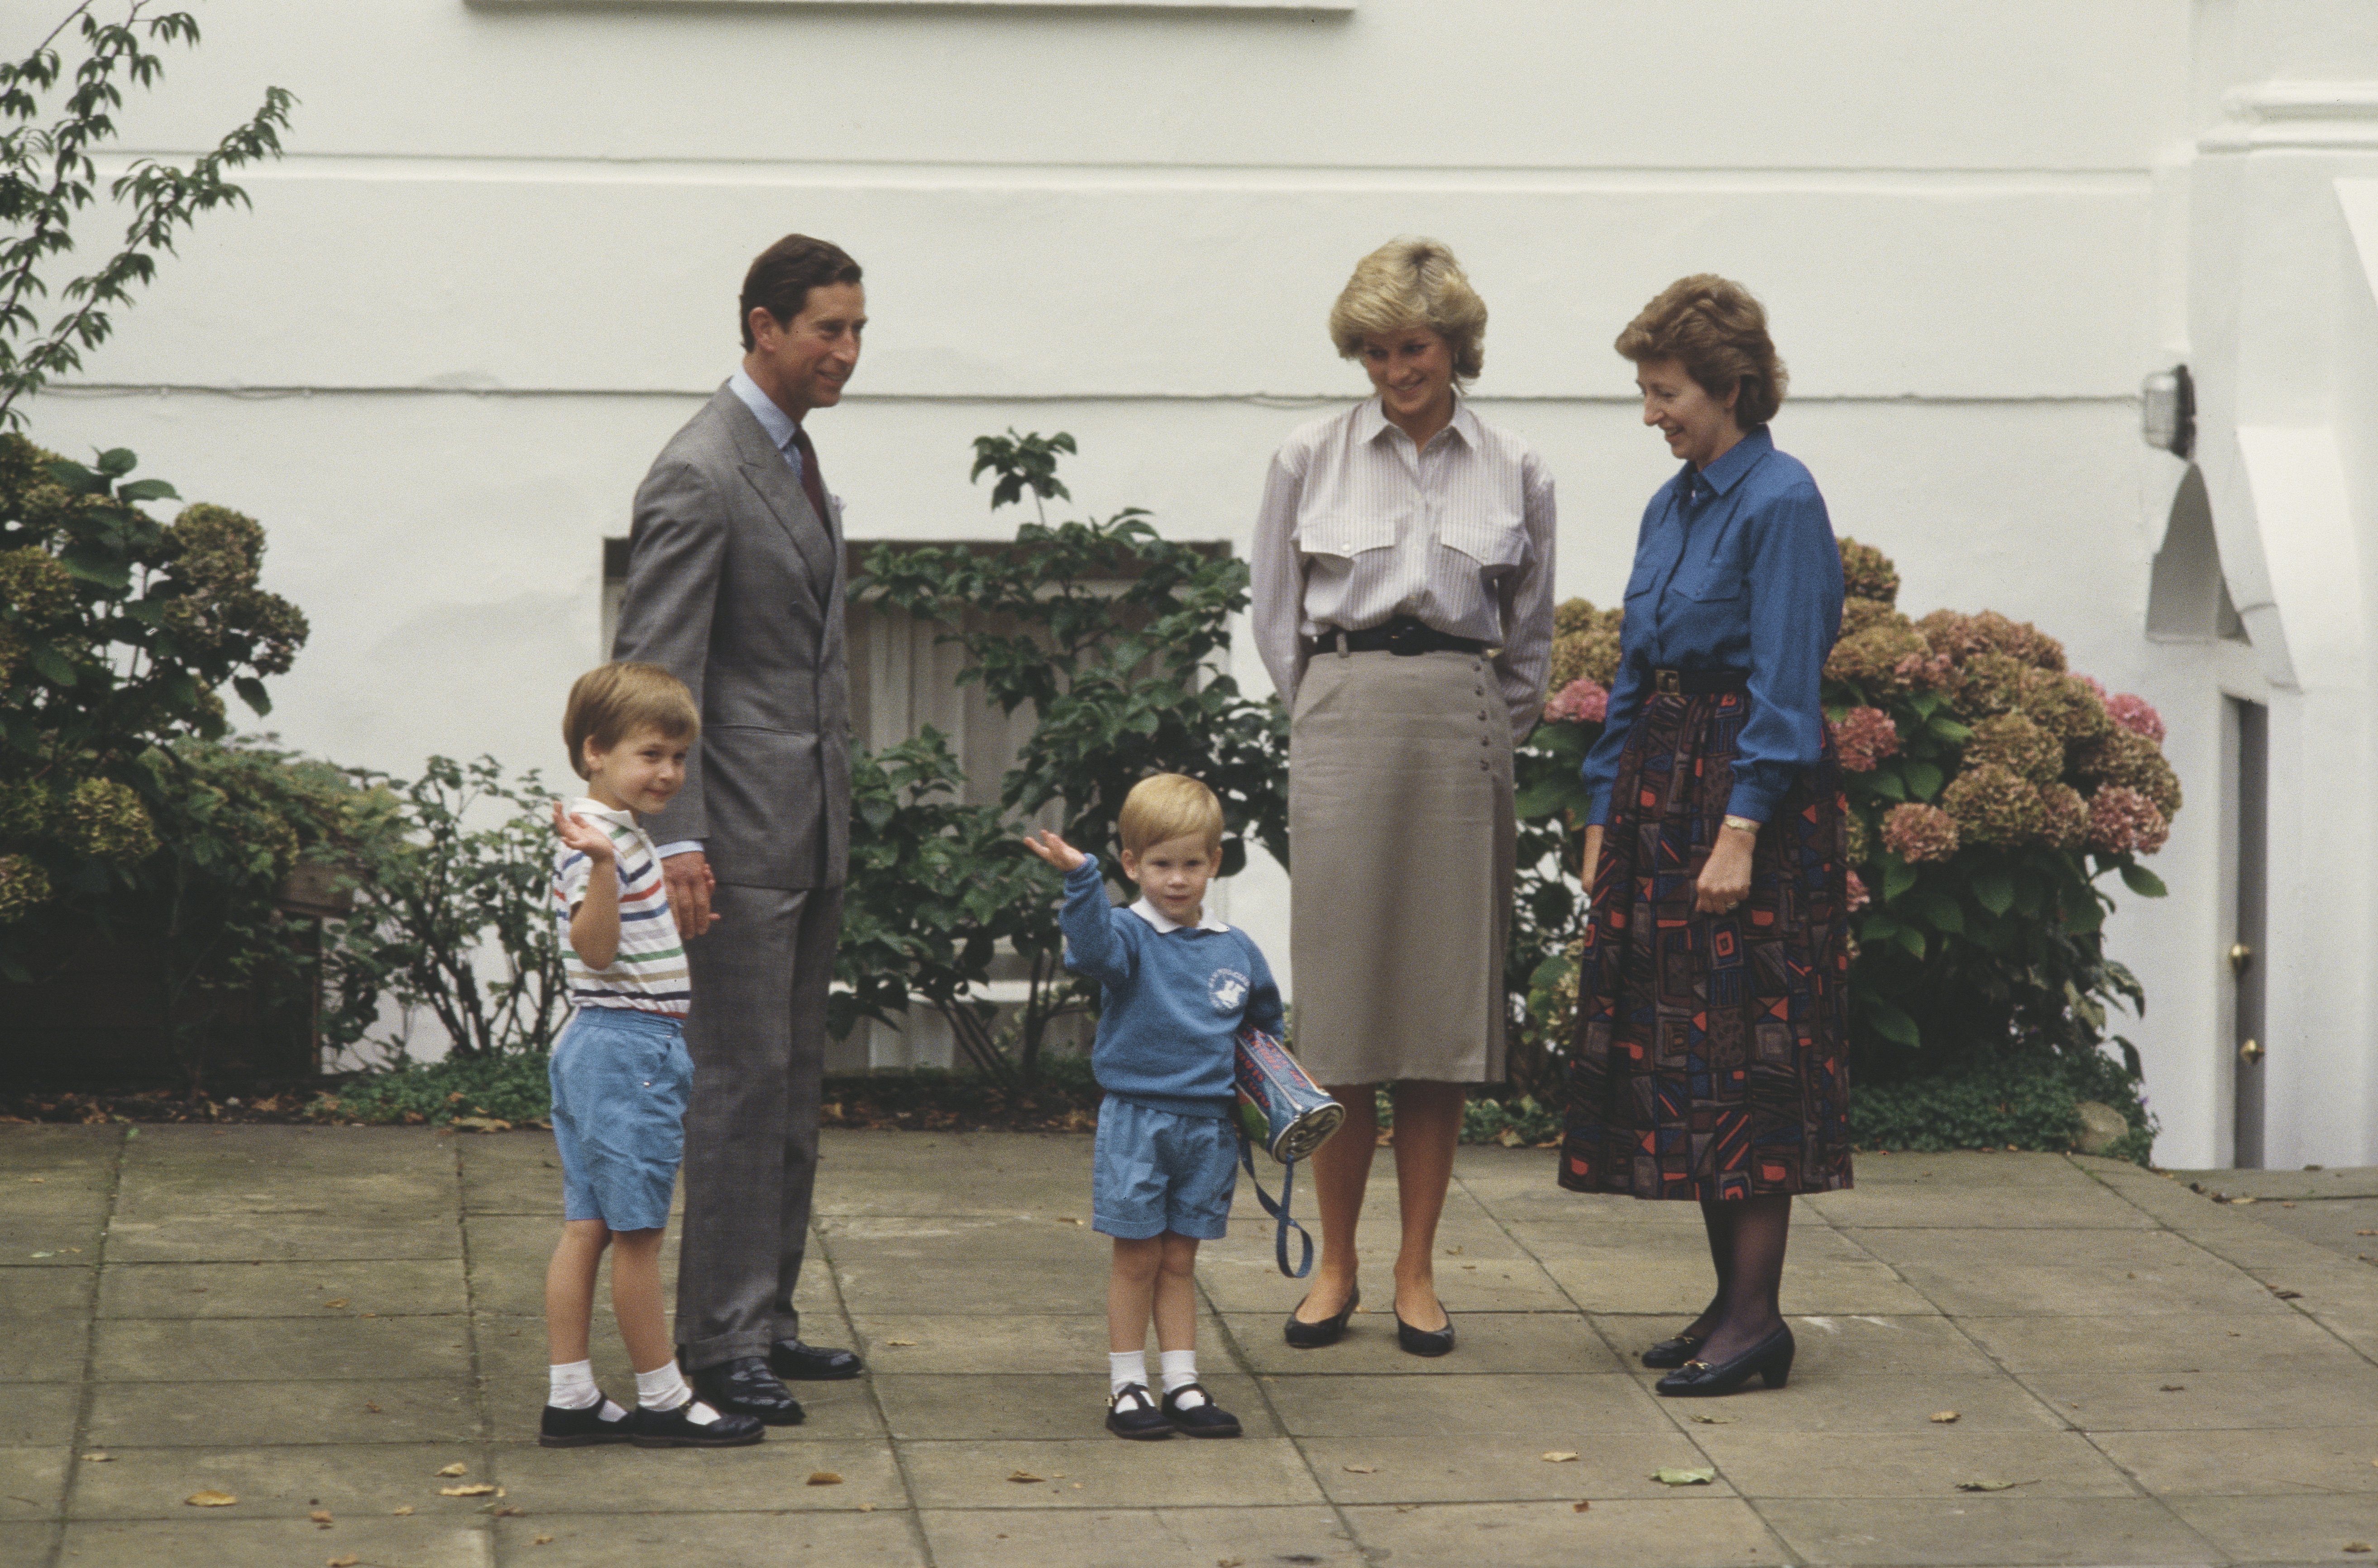 Prince Charles, Princess Diana, and Prince William attending Prince Harry's first day at Mrs Mynors' nursery school in September 1987 in London. | Source: Getty Images